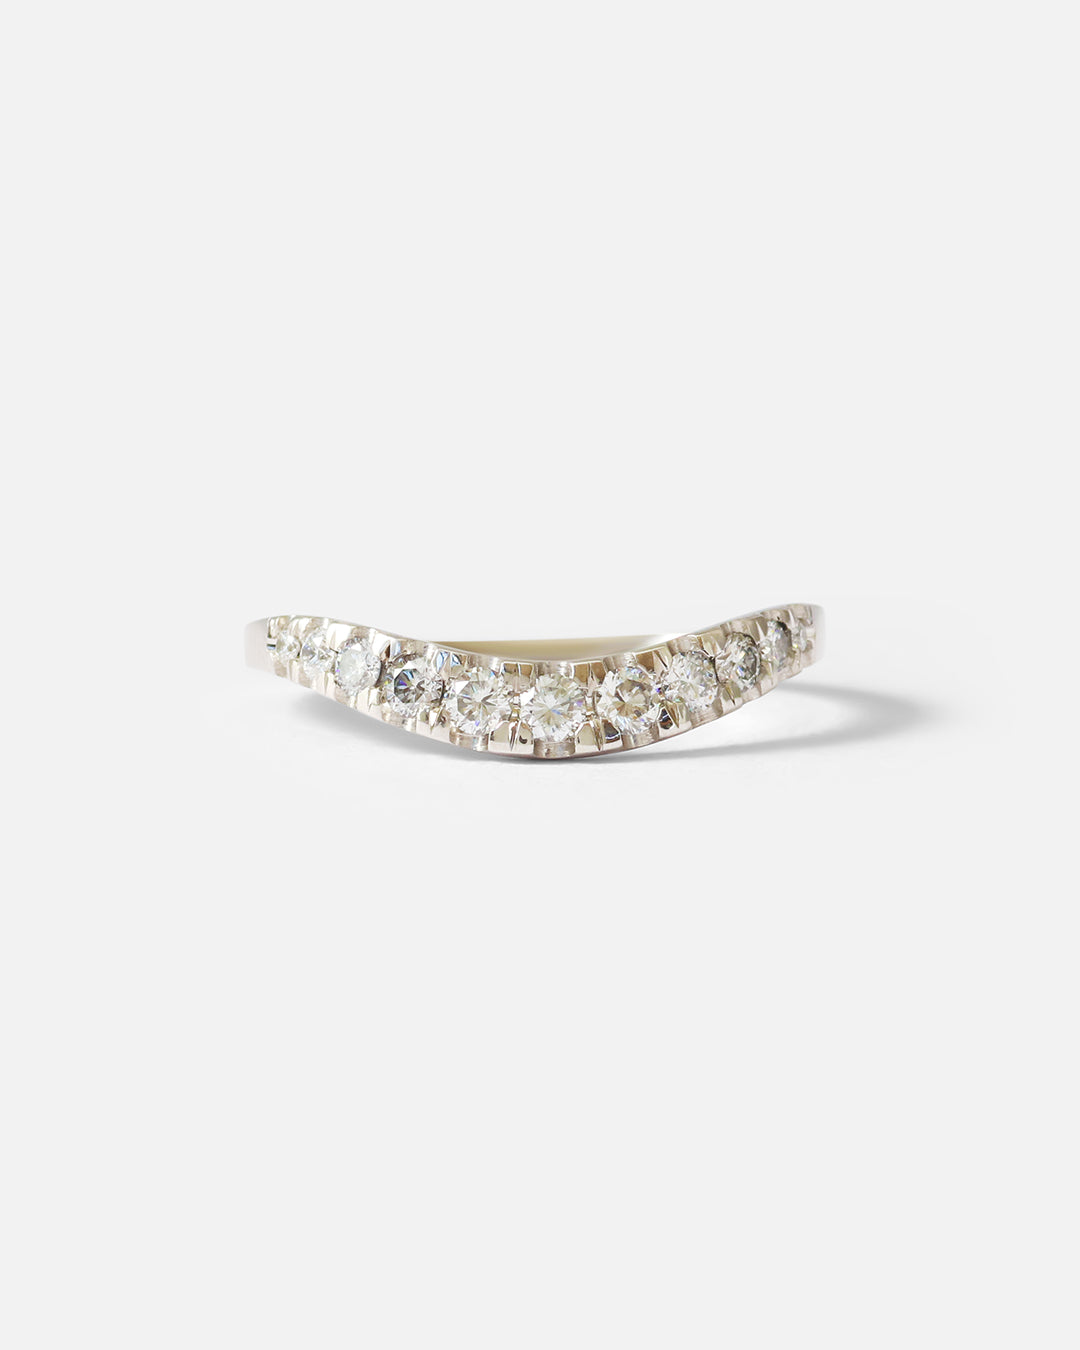 Curved Band / White Diamonds By fitzgerald jewelry in Wedding Bands Category